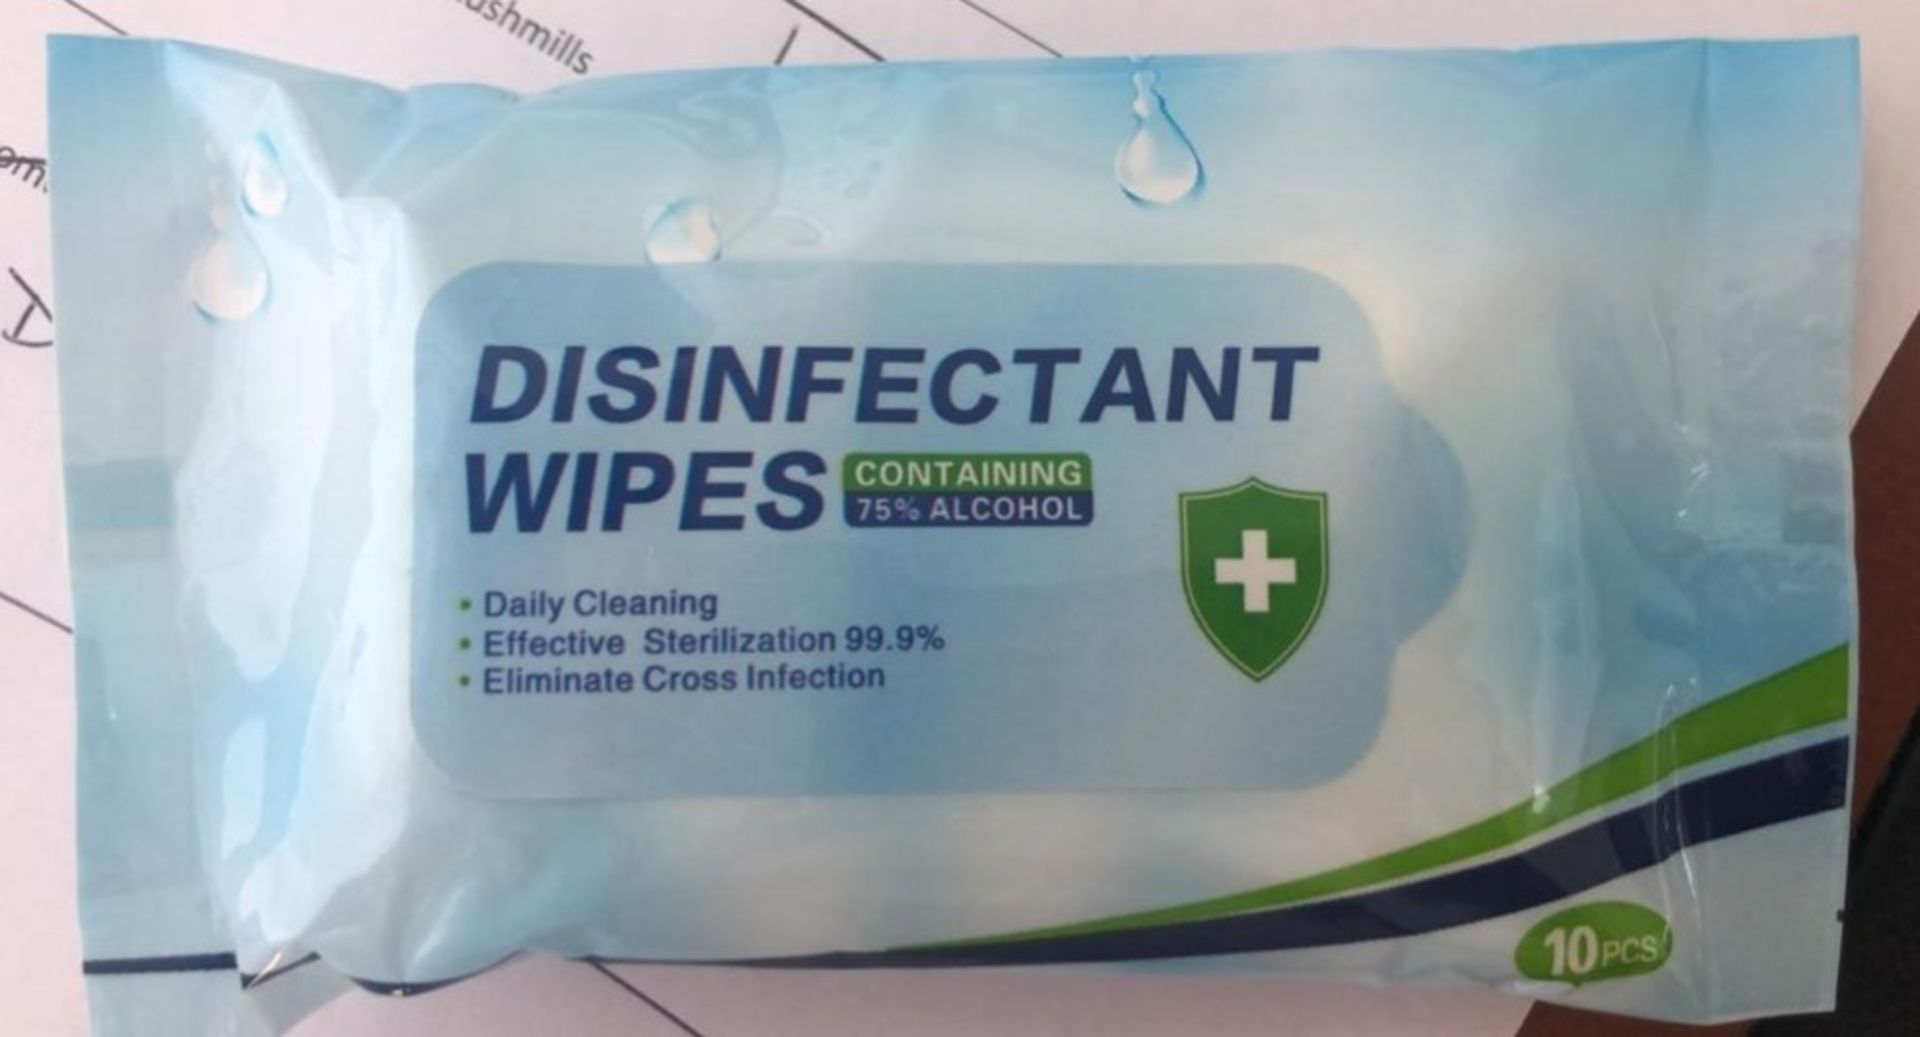 5000 Antibacterial Disinfectant Wipes (75% Alcohol)